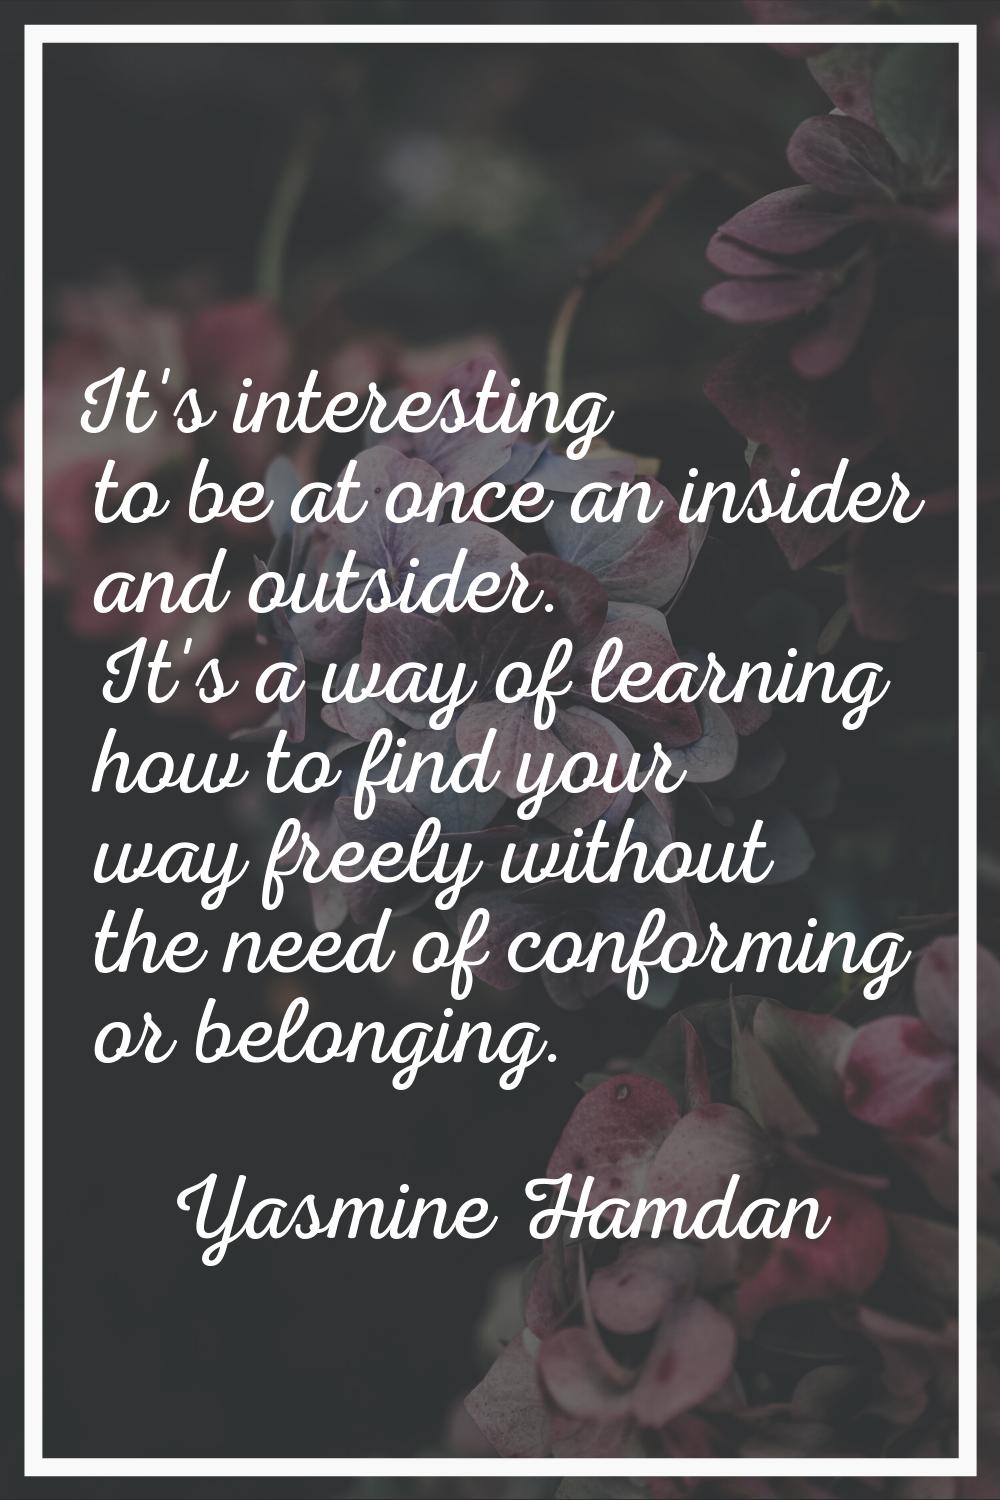 It's interesting to be at once an insider and outsider. It's a way of learning how to find your way